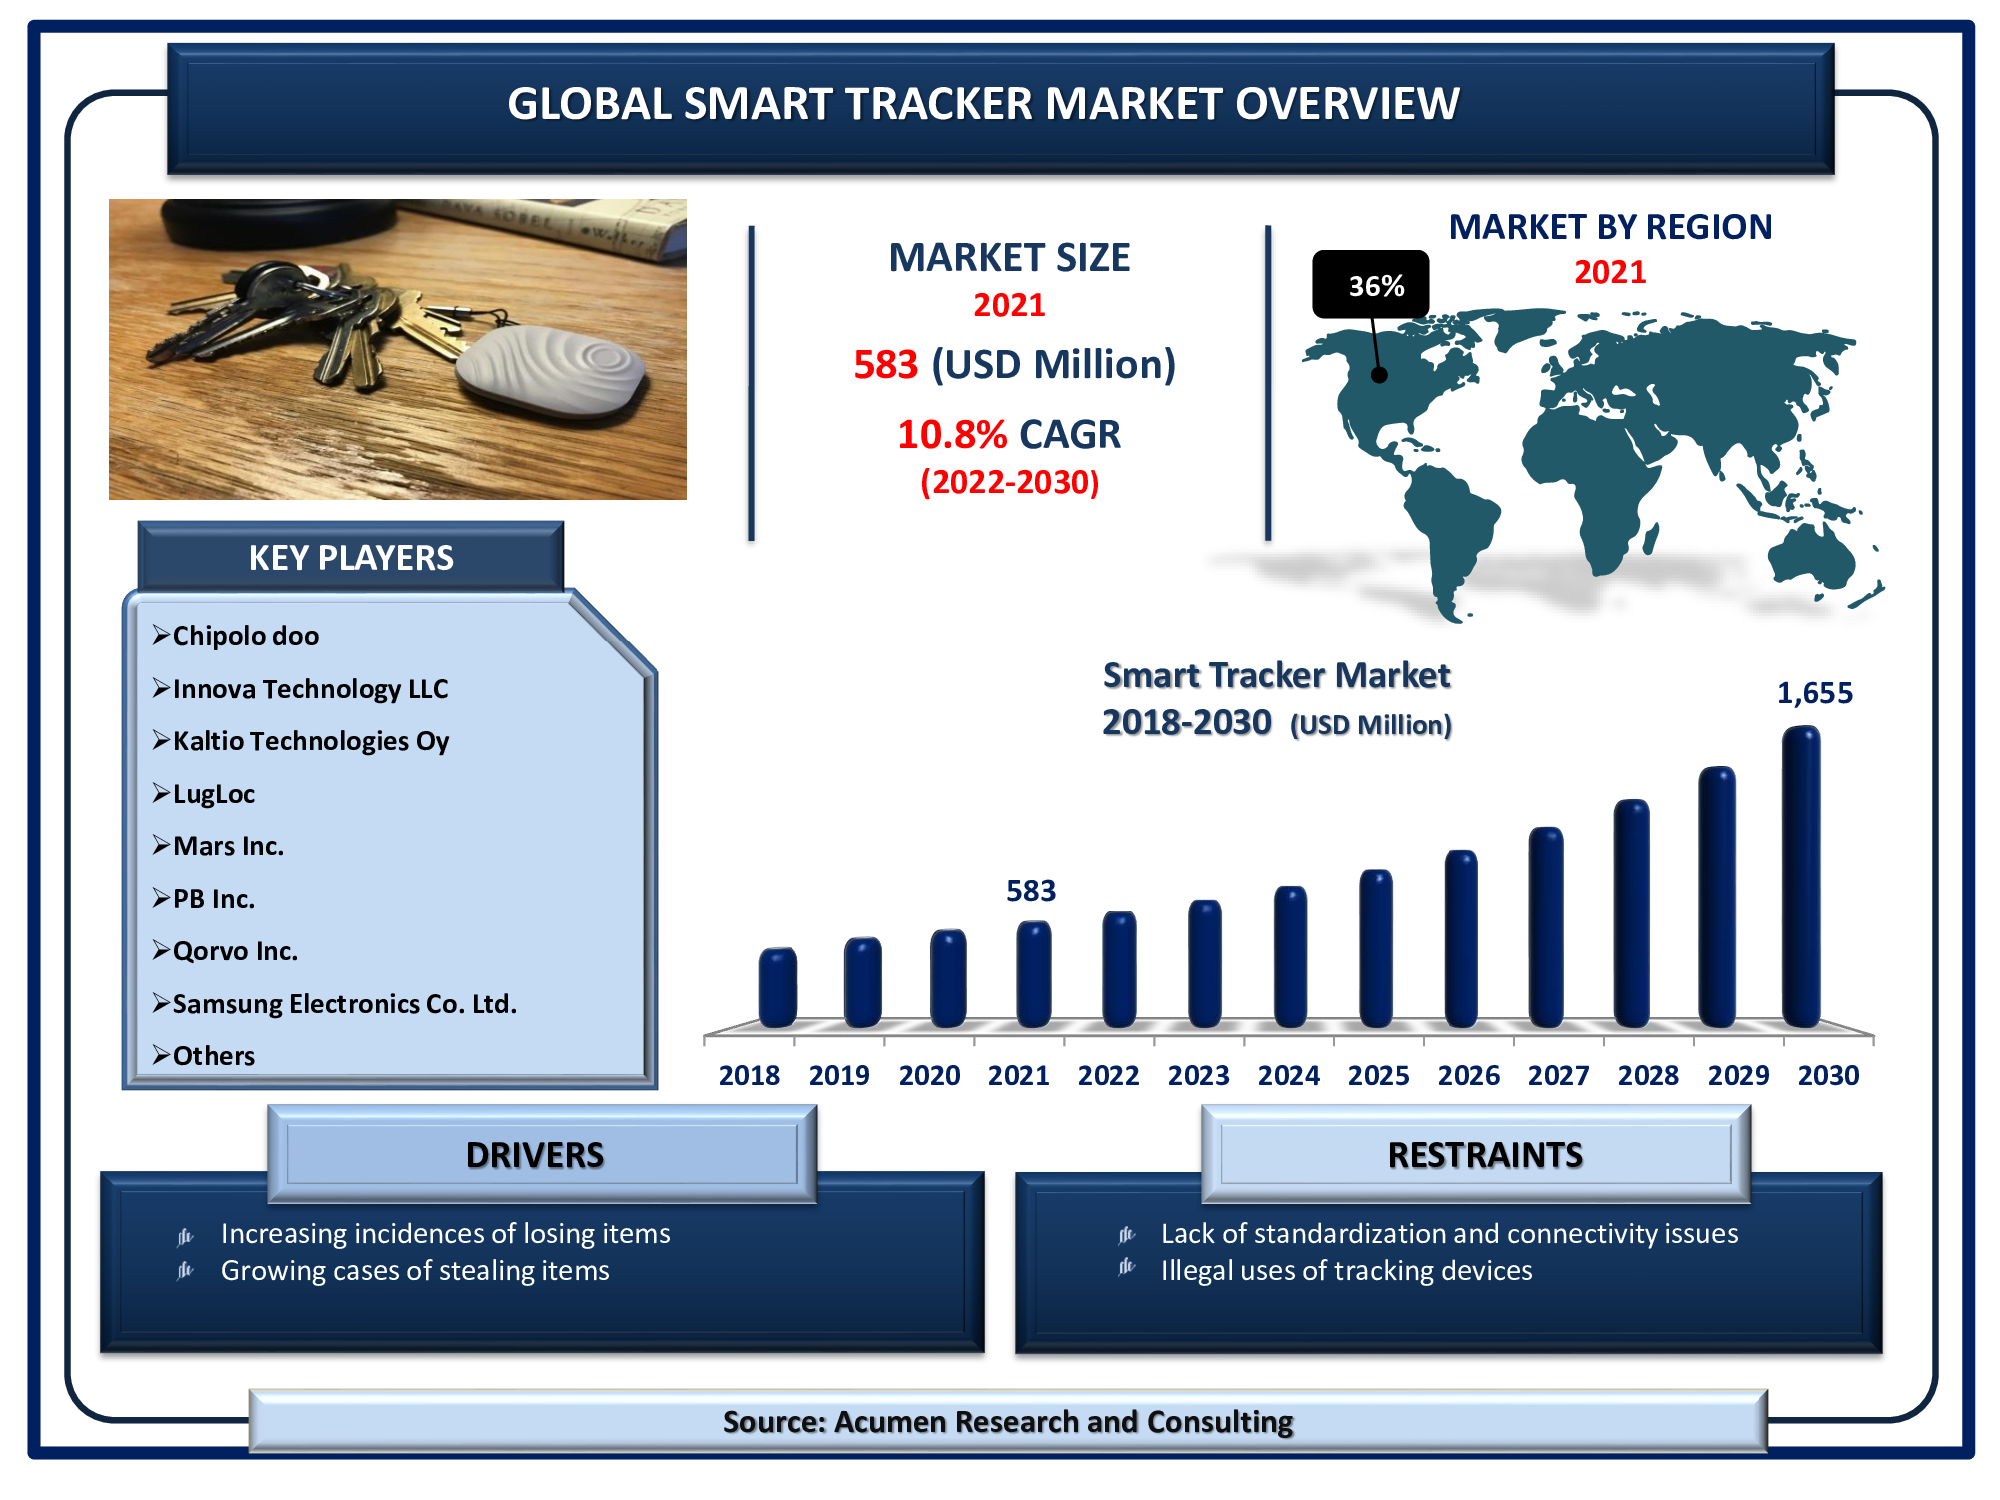 Smart Tracker Market Size valued for USD 583 Million in 2021 and is projected to reach a market size of USD 1,655 Million by 2030; growing at a CAGR of 12.6%.